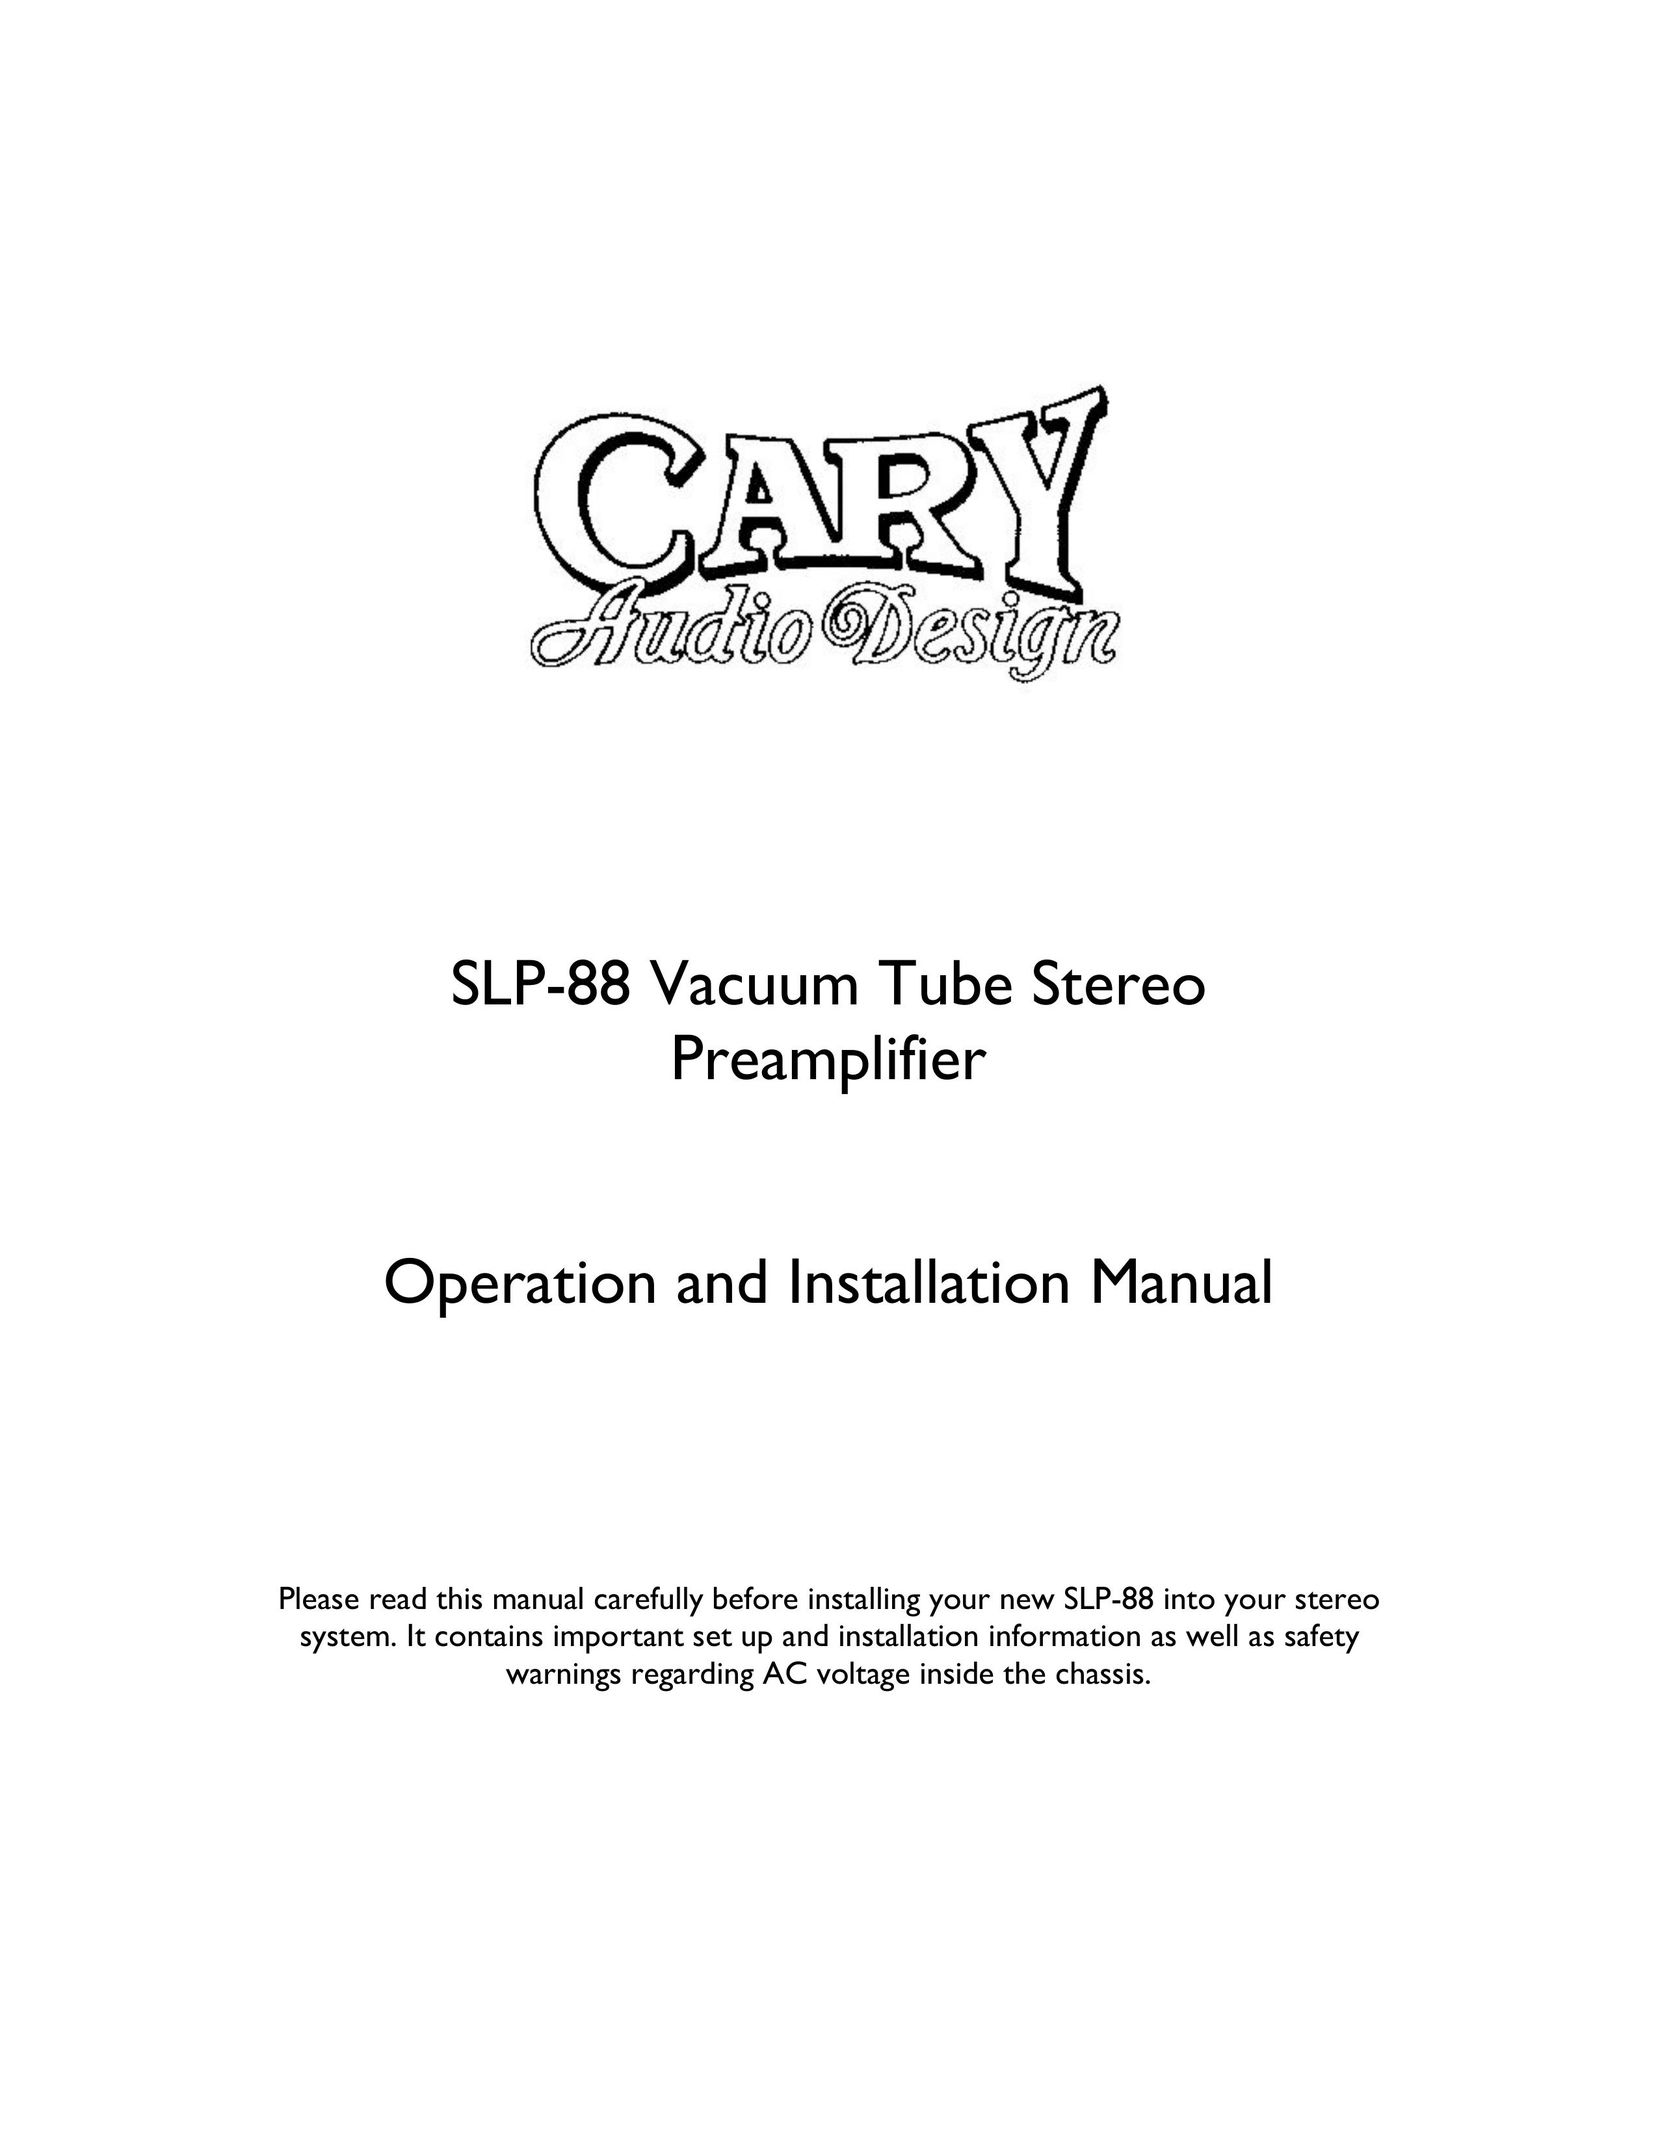 Cary Audio Design SLP-88 Stereo Amplifier User Manual